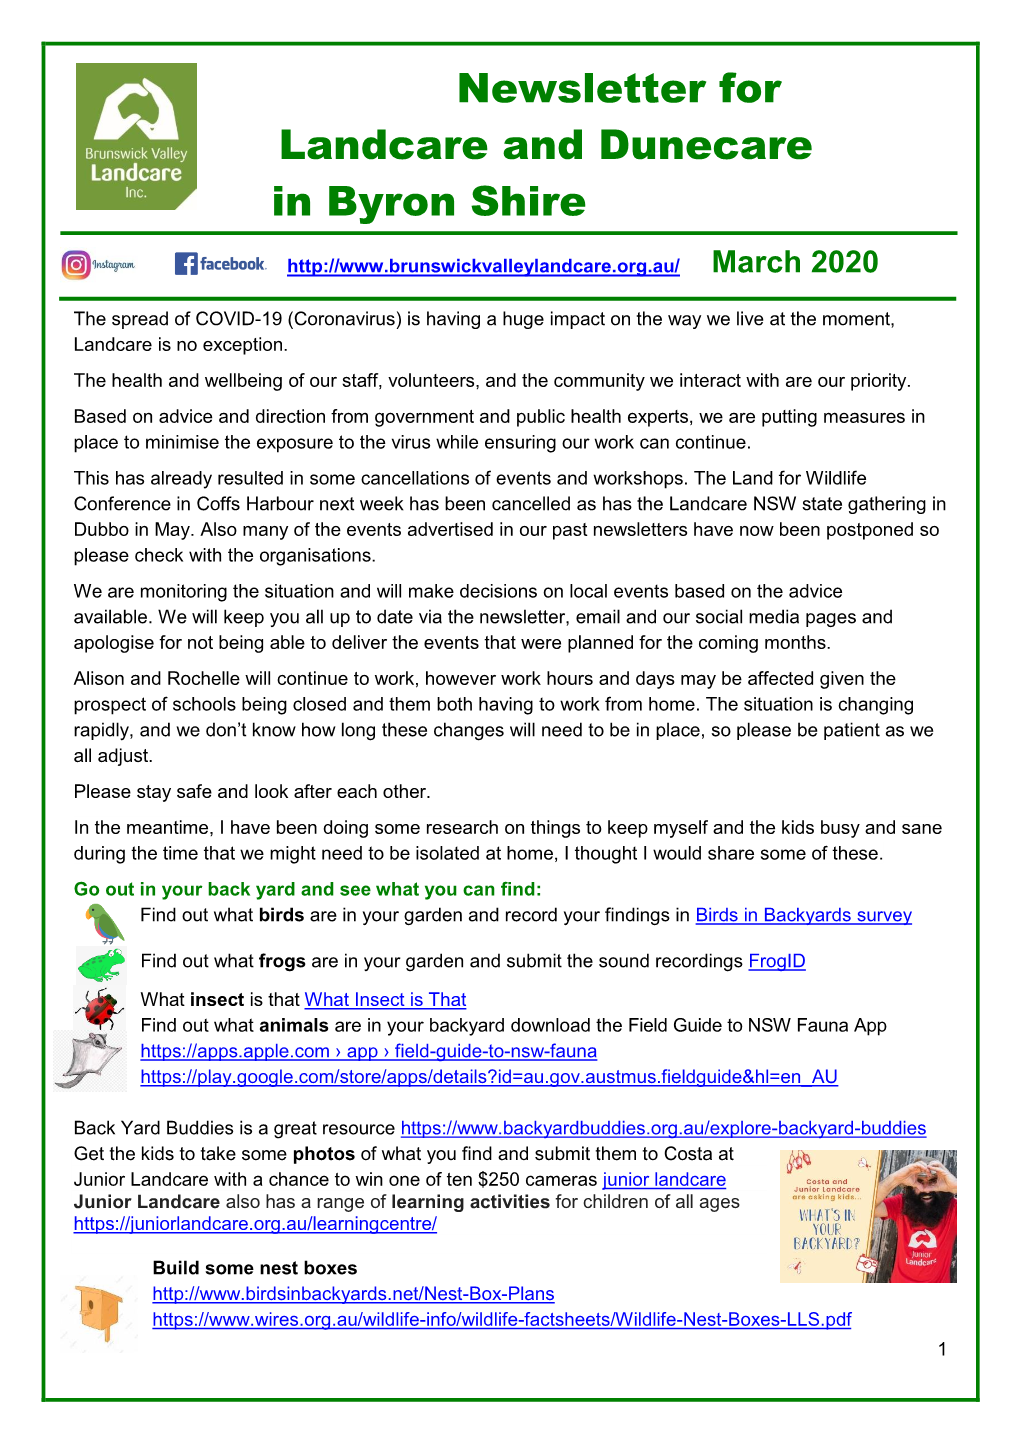 Newsletter for Landcare and Dunecare in Byron Shire